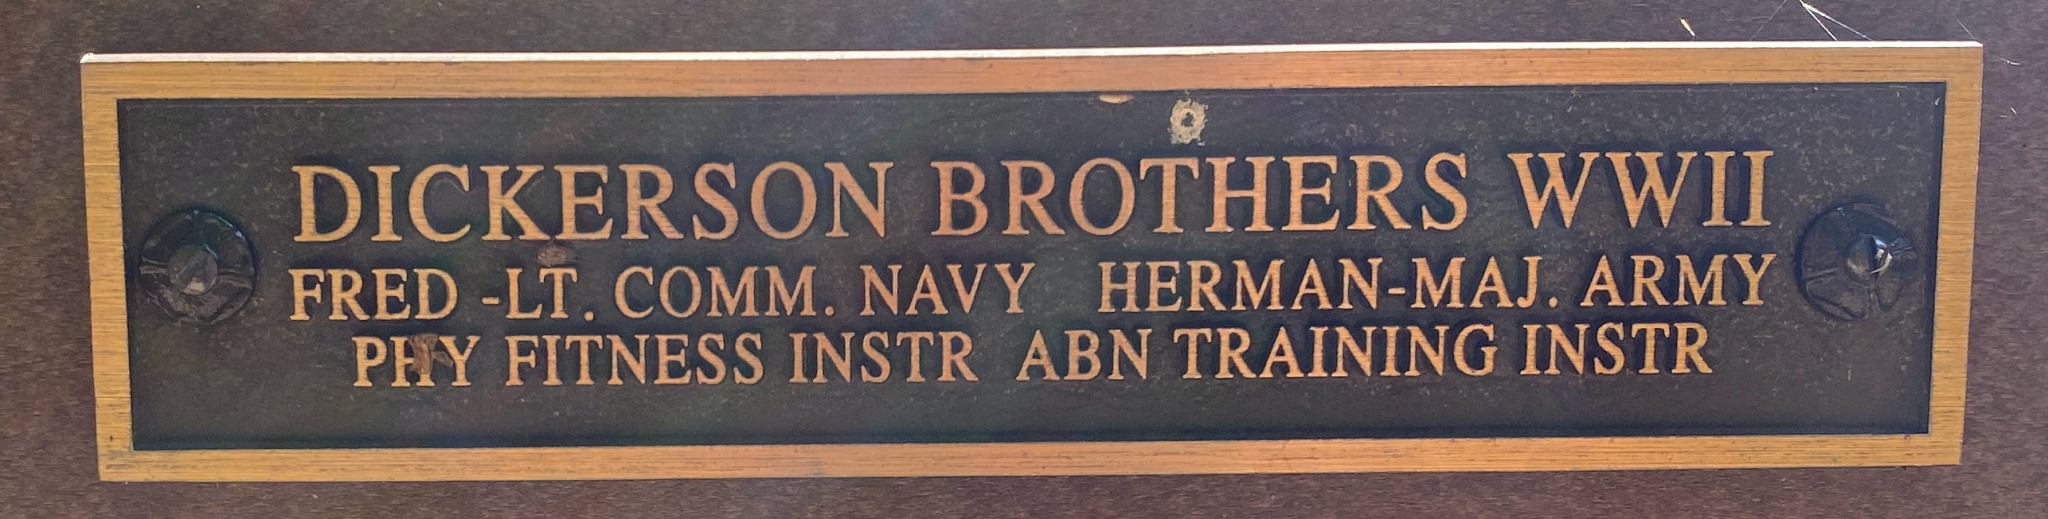 DICKERSON BROTHERS WWII FRED-LT.COOM. NAVY HERMAN-MAJ. ARMY PHY FITNESS INSTR  ABN TNG INSTR